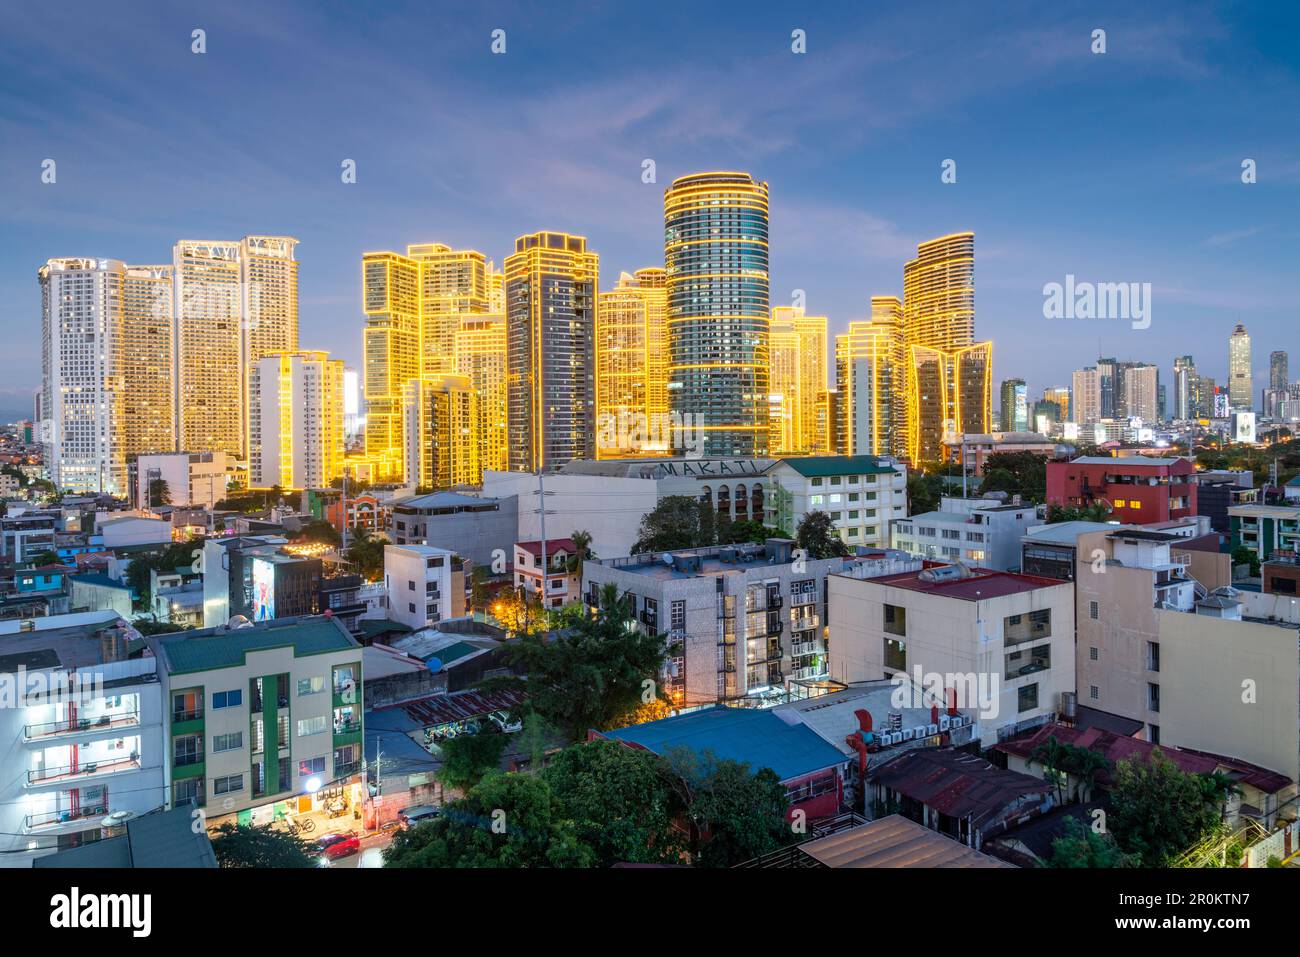 After sundown,the modern high rise apartment and office blocks of Makaiti come to life,when the beautiful bright golden flourescent strip lights cover Stock Photo